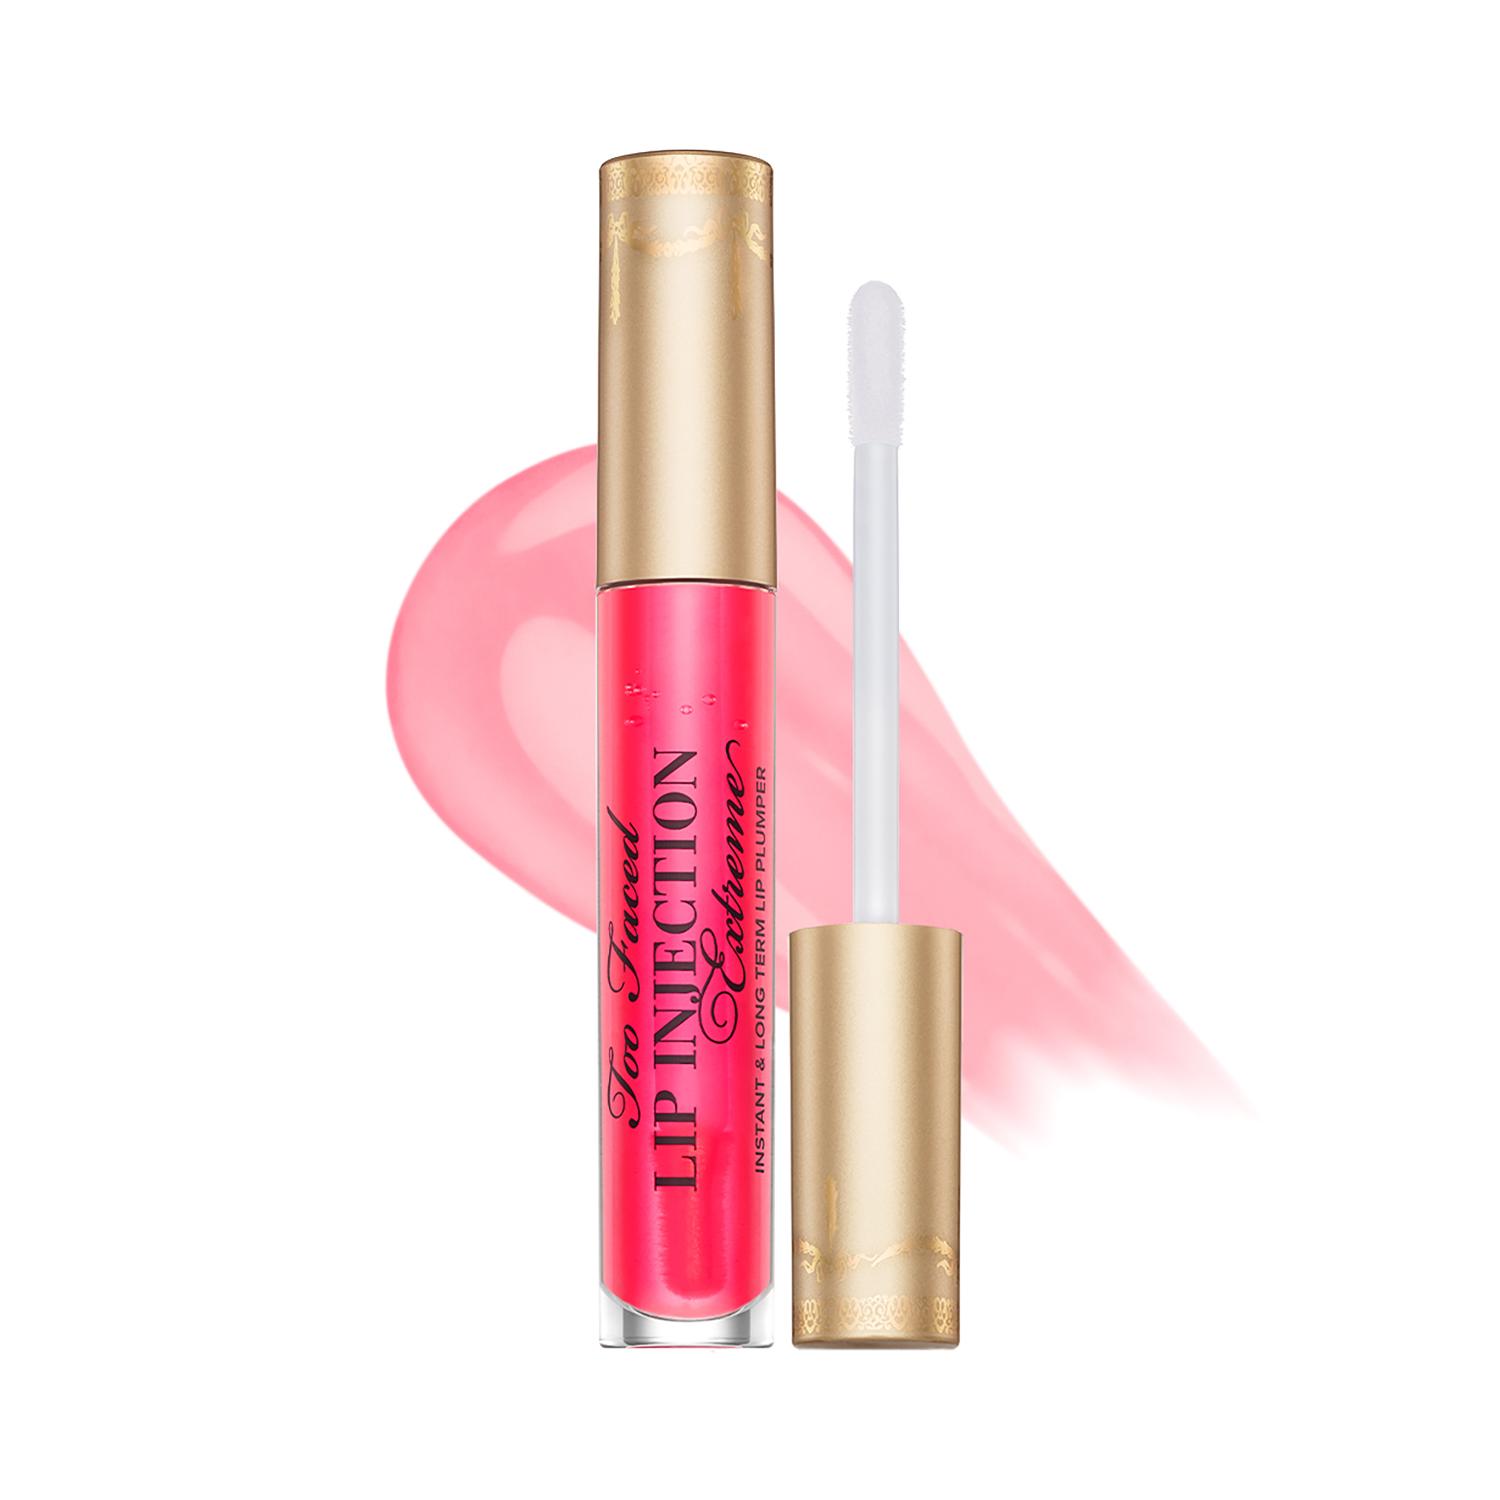 Too Faced | Too Faced Lip Injection Plumping Lip Gloss -  Pink Punch (4g)